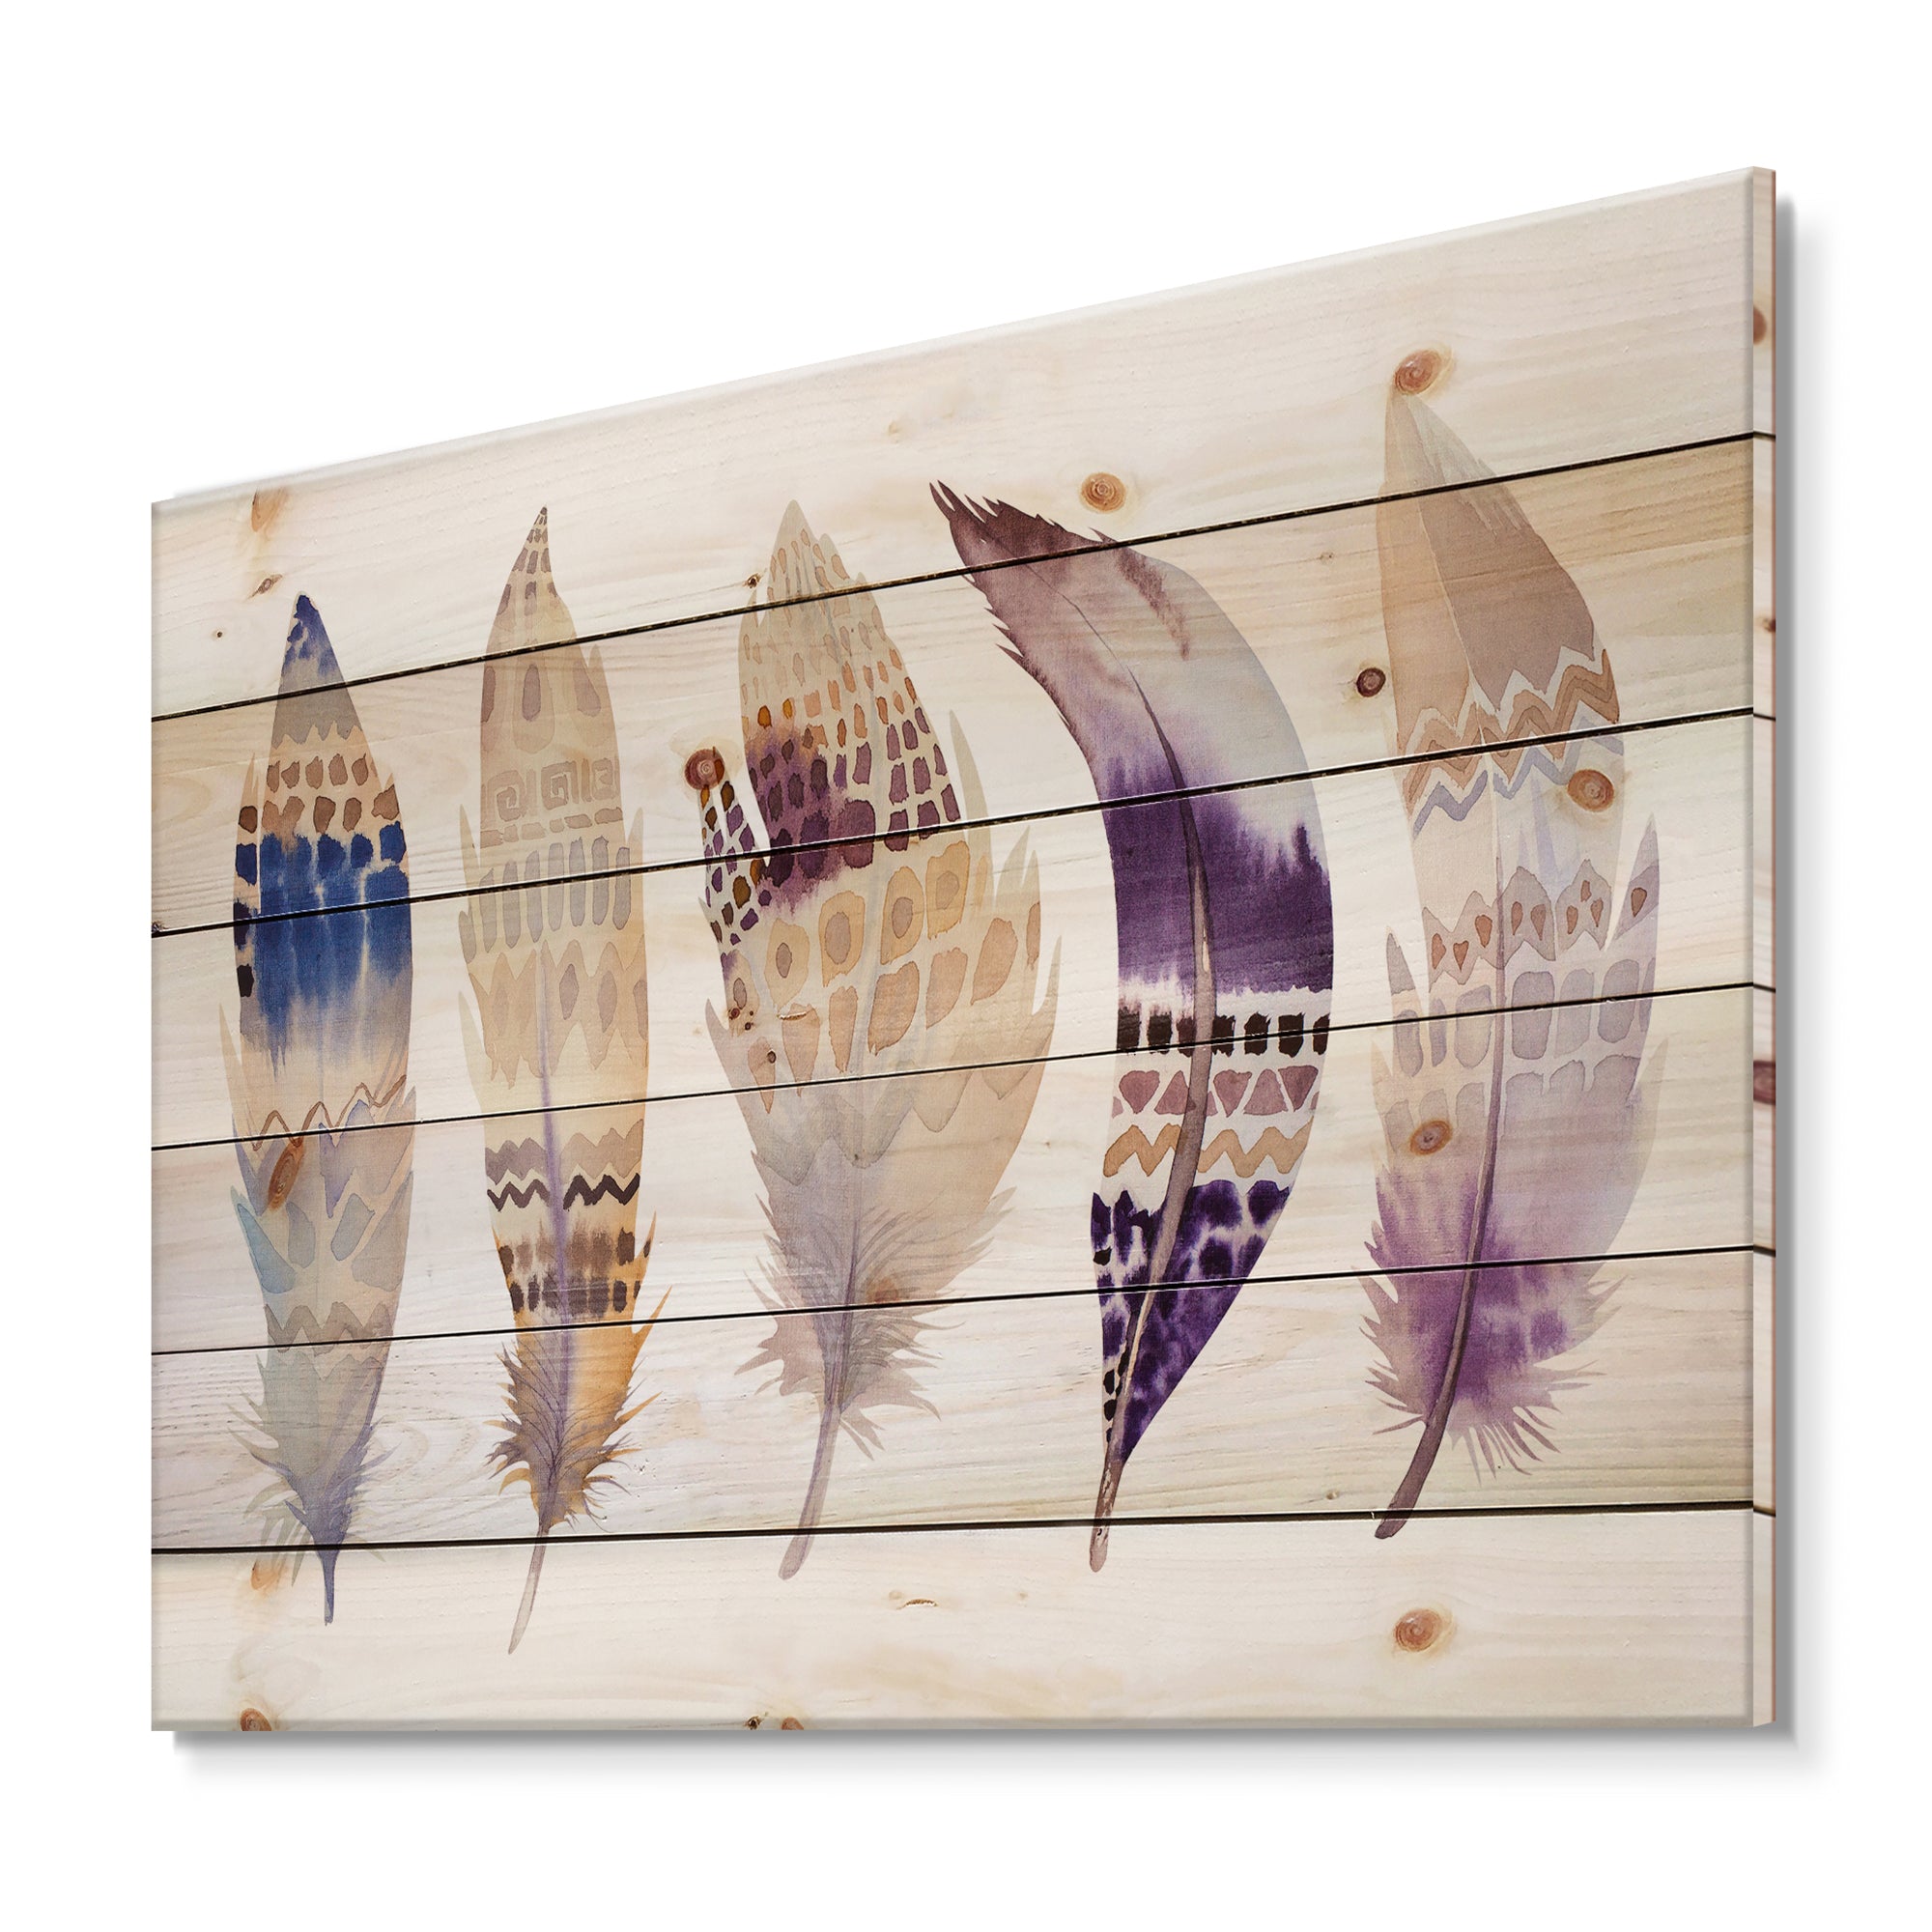 Ethnic Purple Boho Feathers - Bohemian & Eclectic Print on Natural Pine Wood